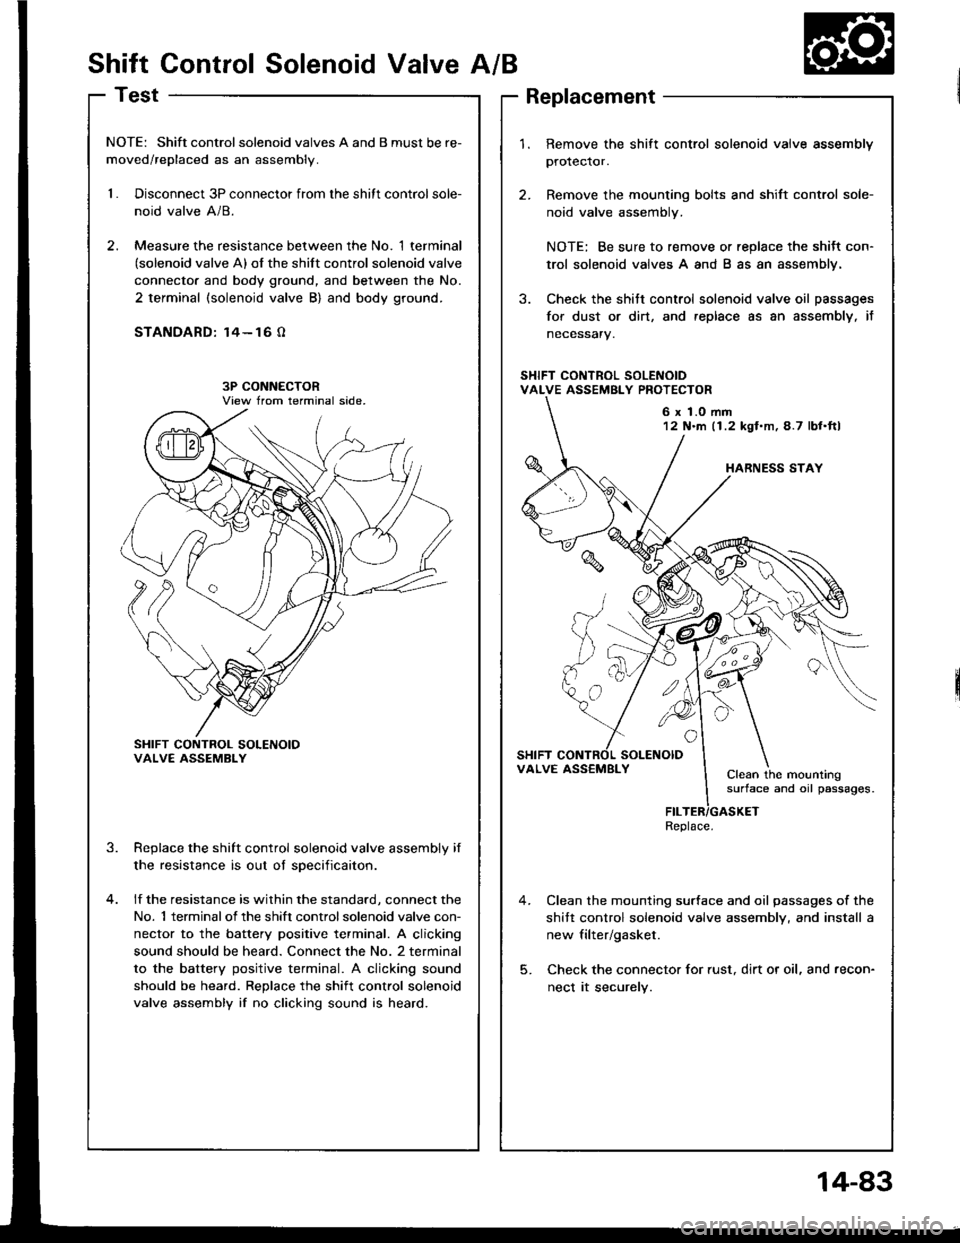 HONDA INTEGRA 1994 4.G Owners Manual Shift Control Solenoid ValveA/B
Test
NOTE: Shift controlsolenoid valves A and B must be re-
moved/replaced as an assembly.
1.Disconnect 3P connector from the shitt control sole-
noid valve A/8.
Measur